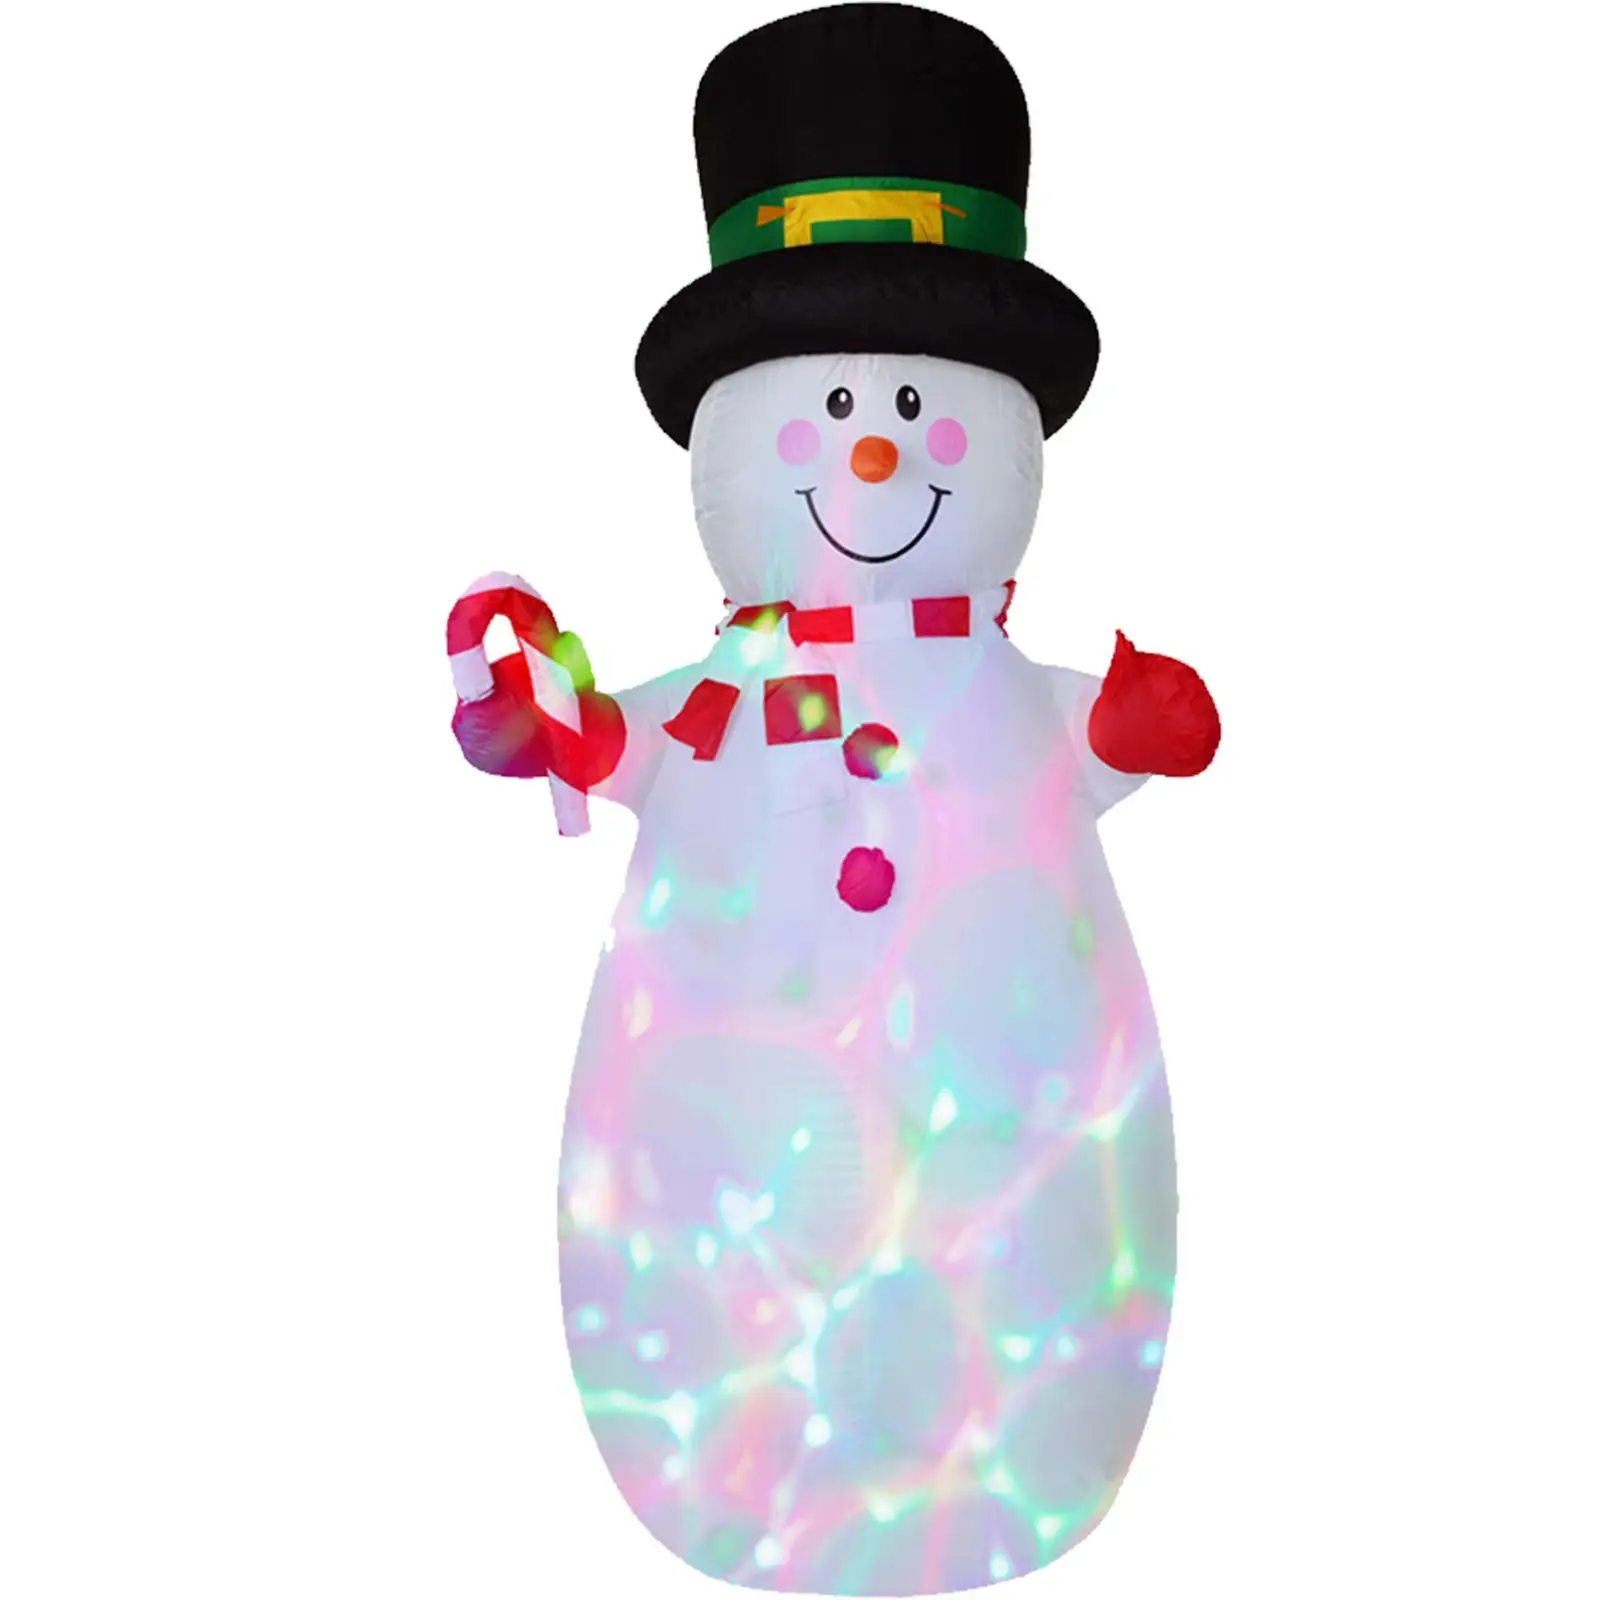 6ft Christmas Inflatable Snowman with Lights Holiday Inflatable Snowman Ornament for Festival Outdoor Patio Home Party